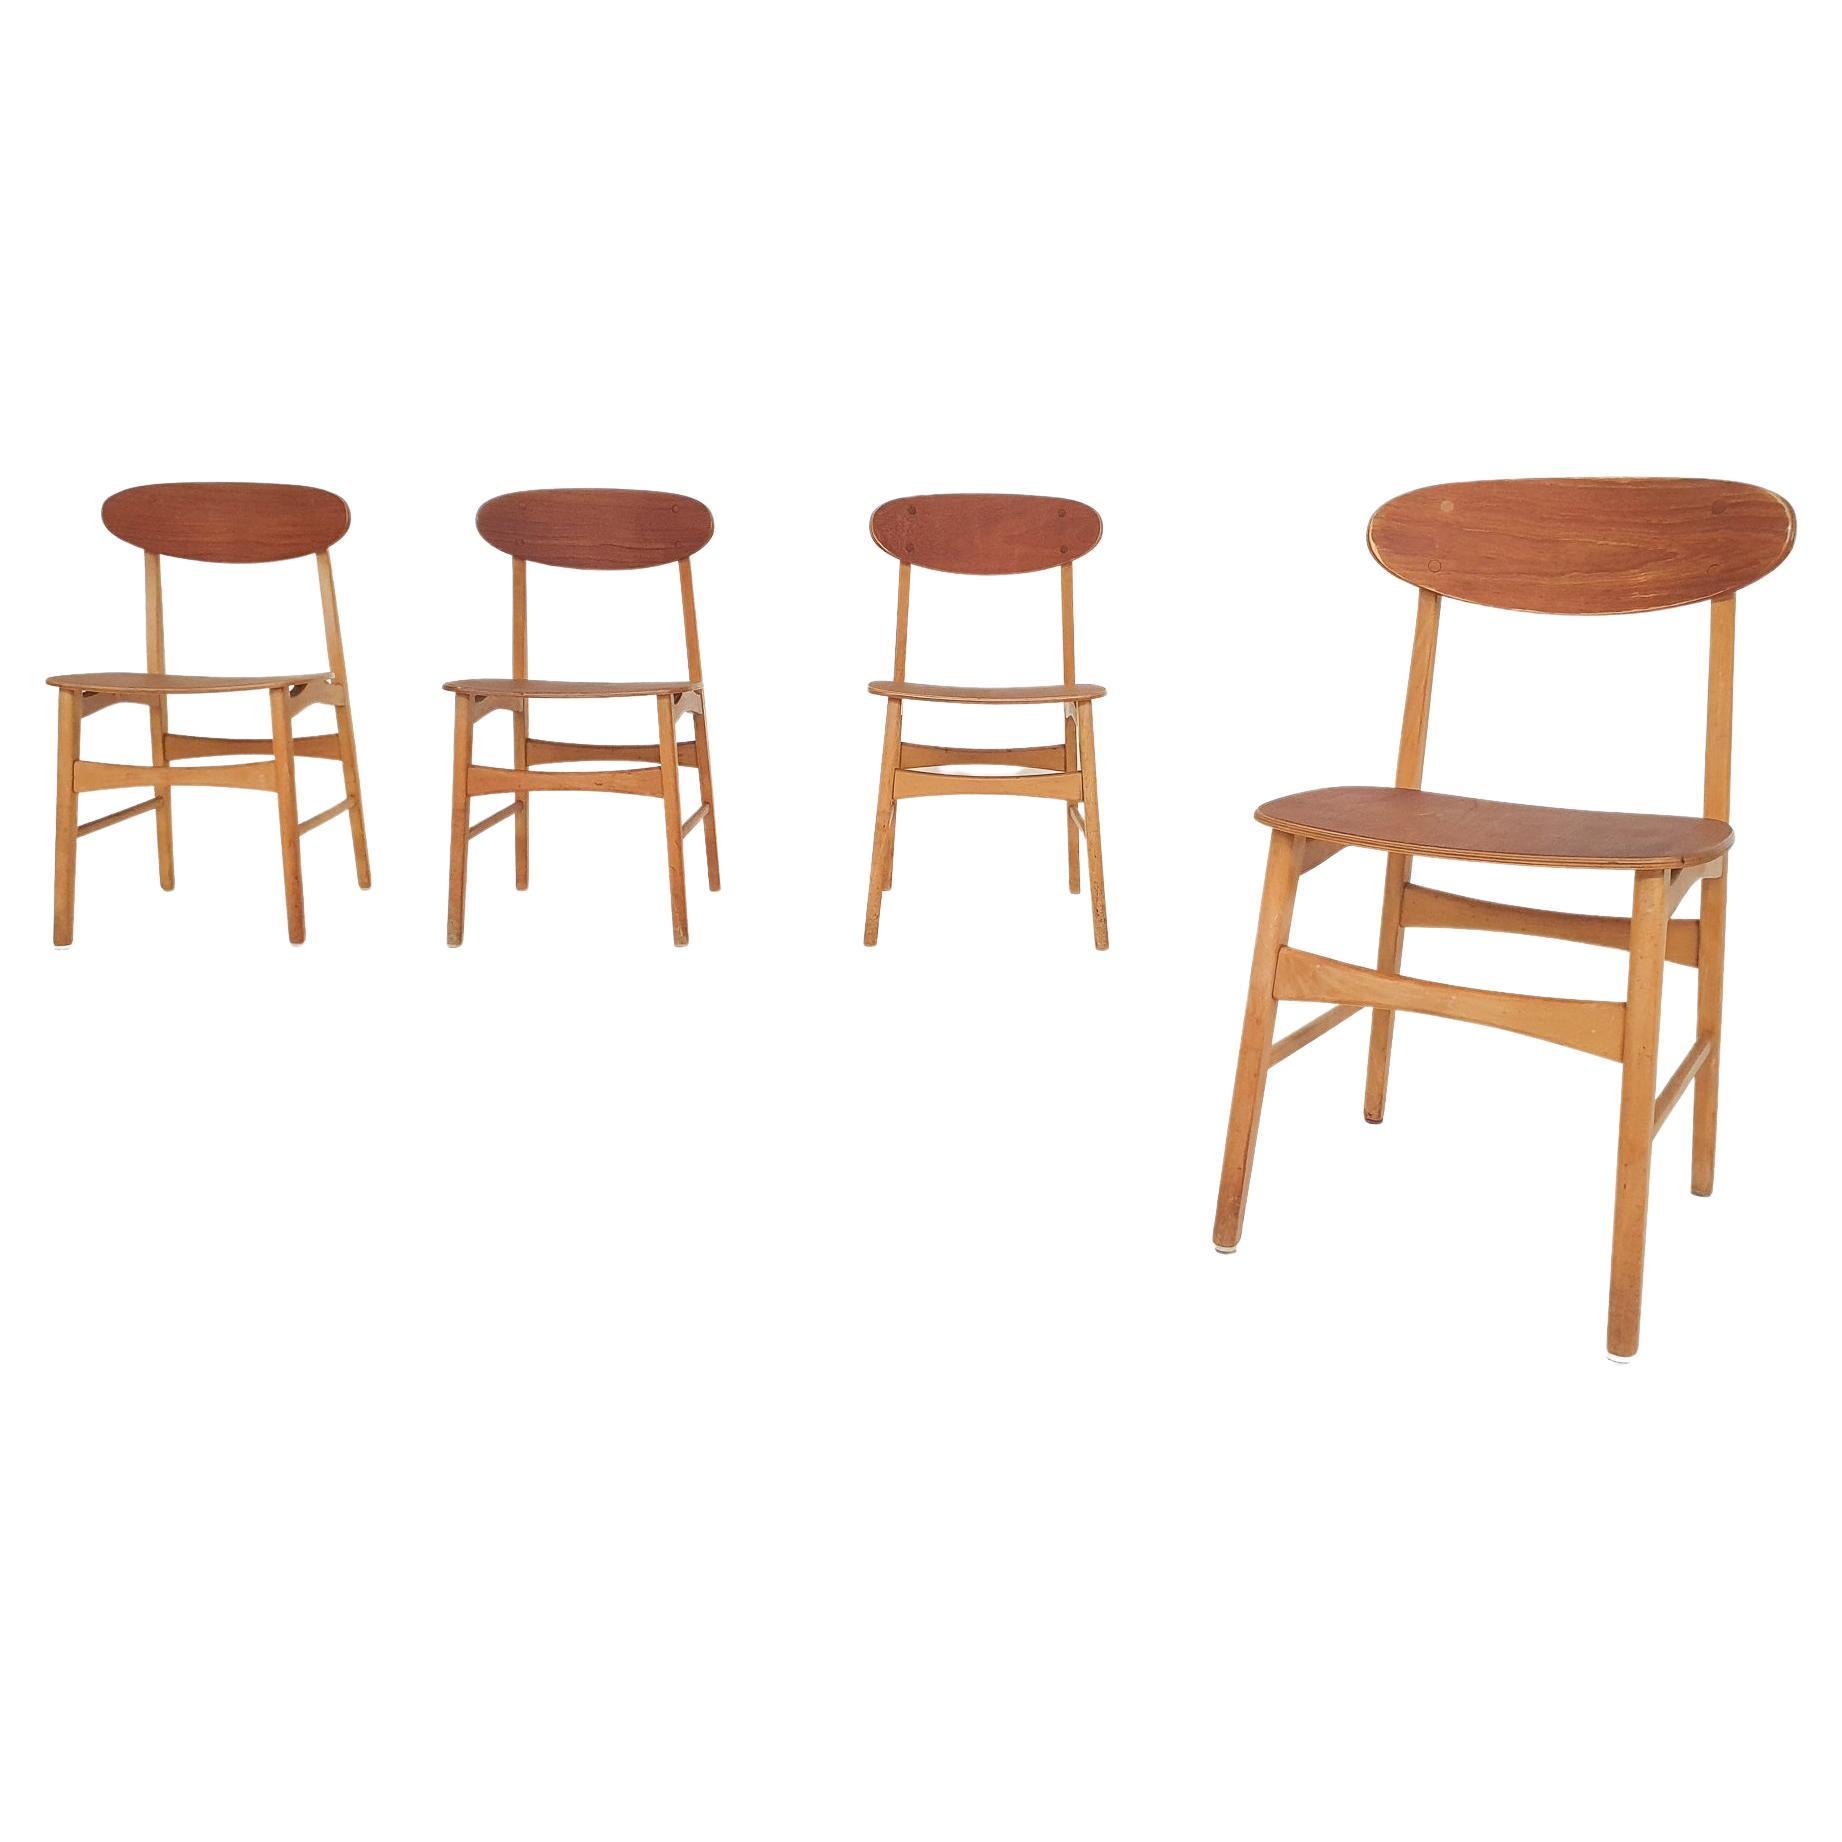 Set of four teak plywood chairs, The Netherlands 1950's